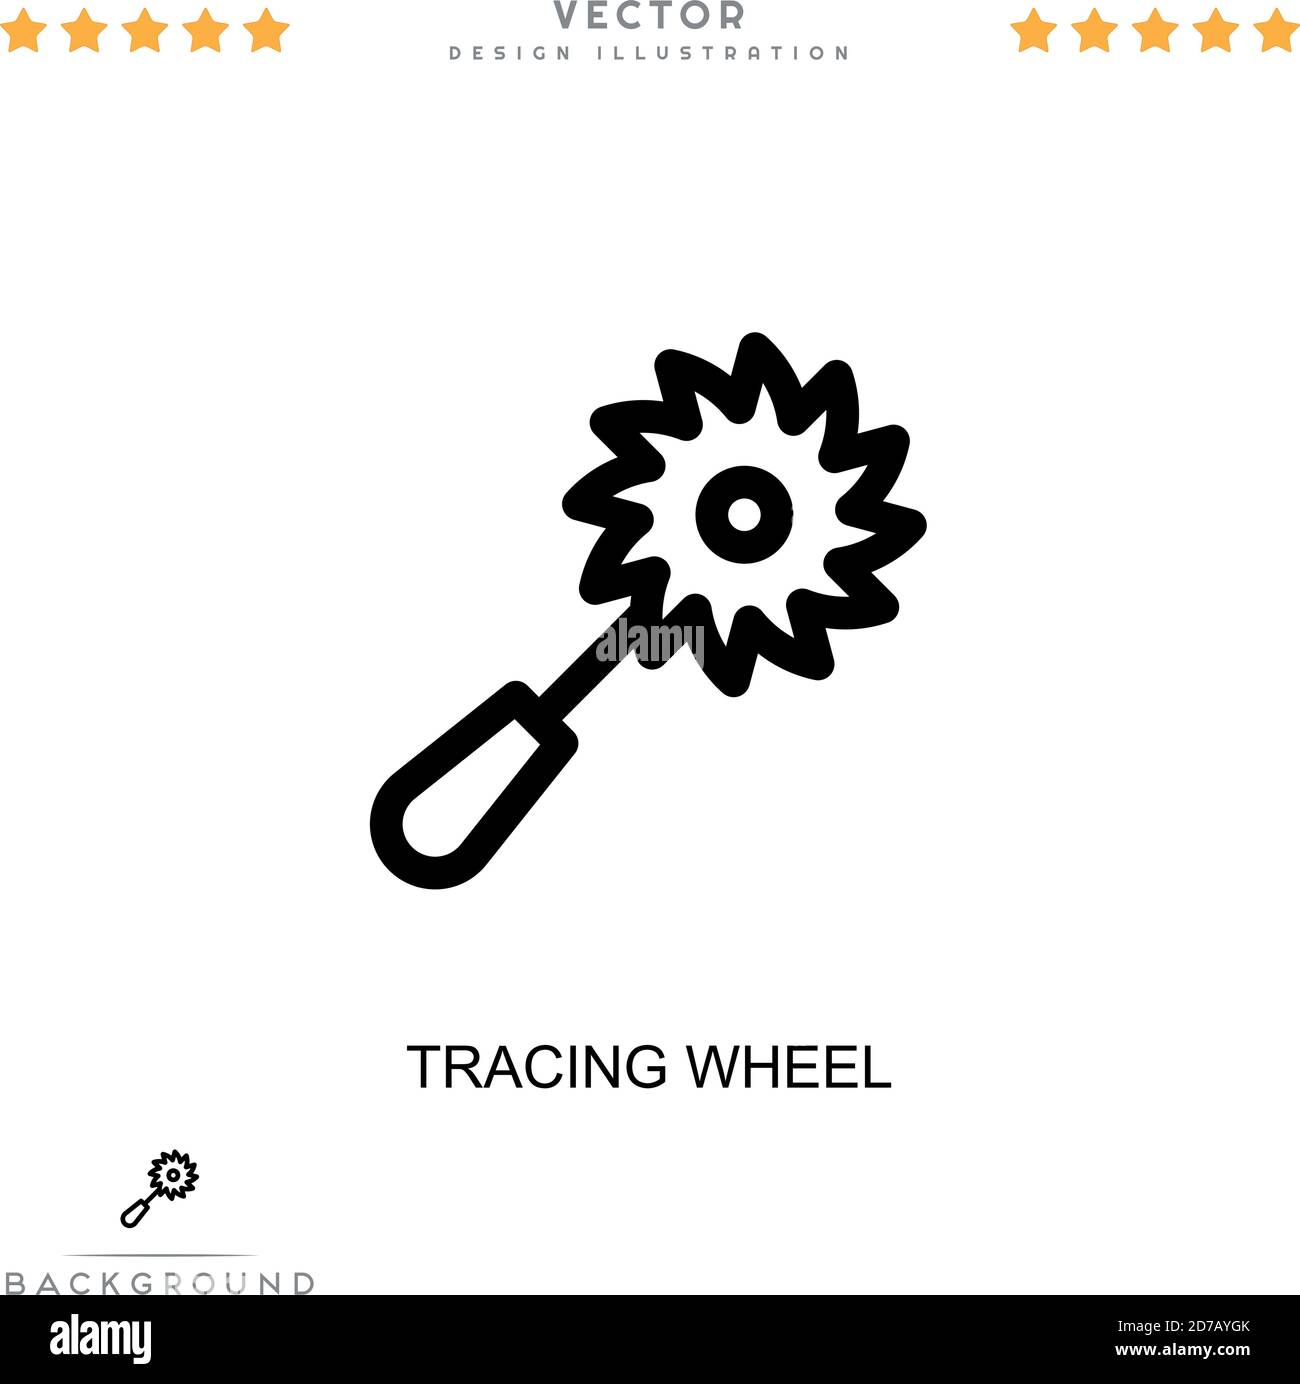 471 Sewing Tracing Wheel Images, Stock Photos, 3D objects, & Vectors